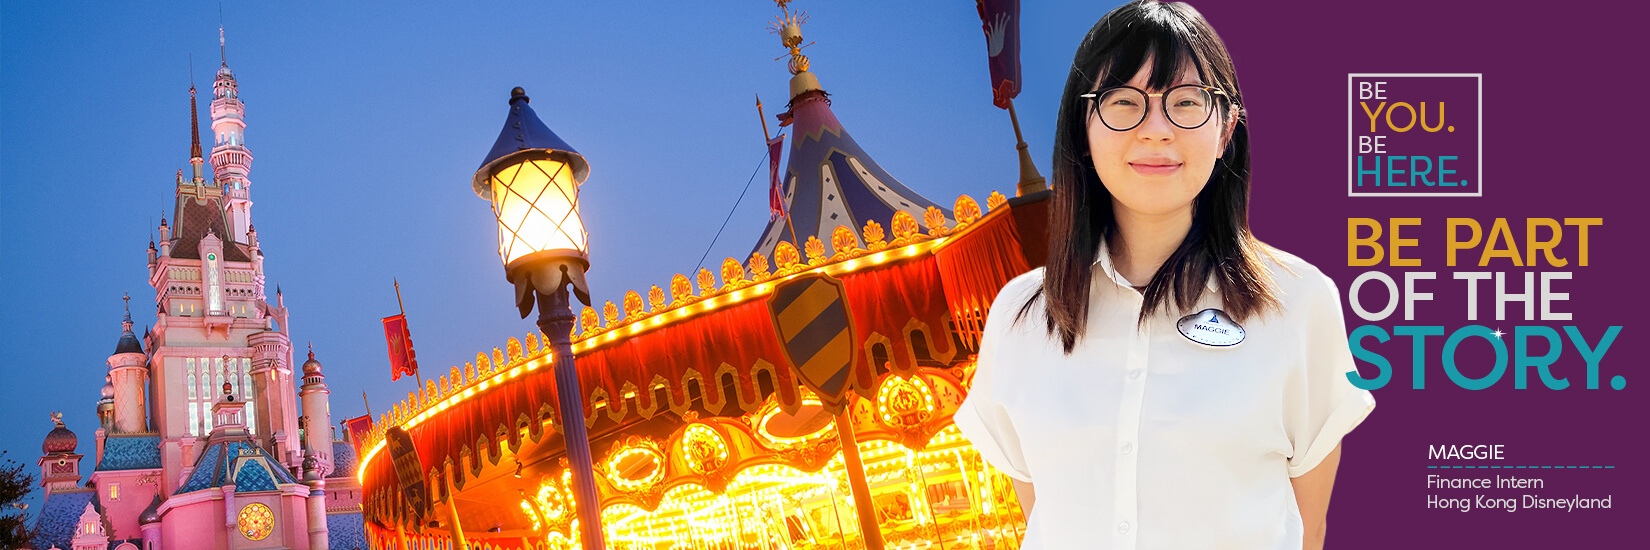 Be You. Be Here. Be Part of the Story. Maggie - Finance Intern, Hong Kong Disneyland 